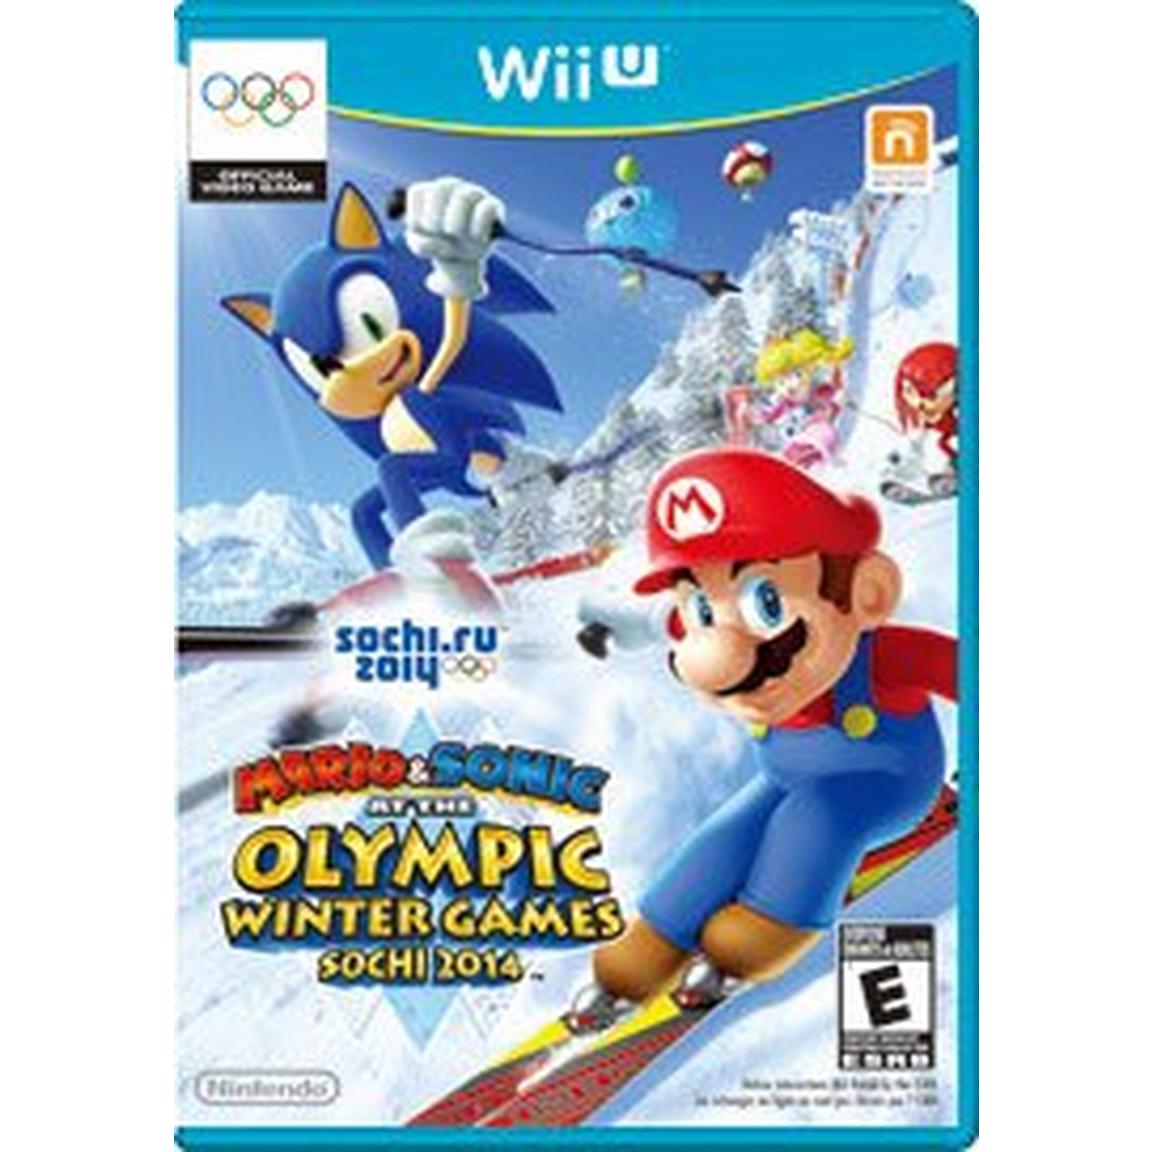 Mario and Sonic at the Sochi 2014 Olympic Winter Games - Nintendo Wii U, Pre-Owned